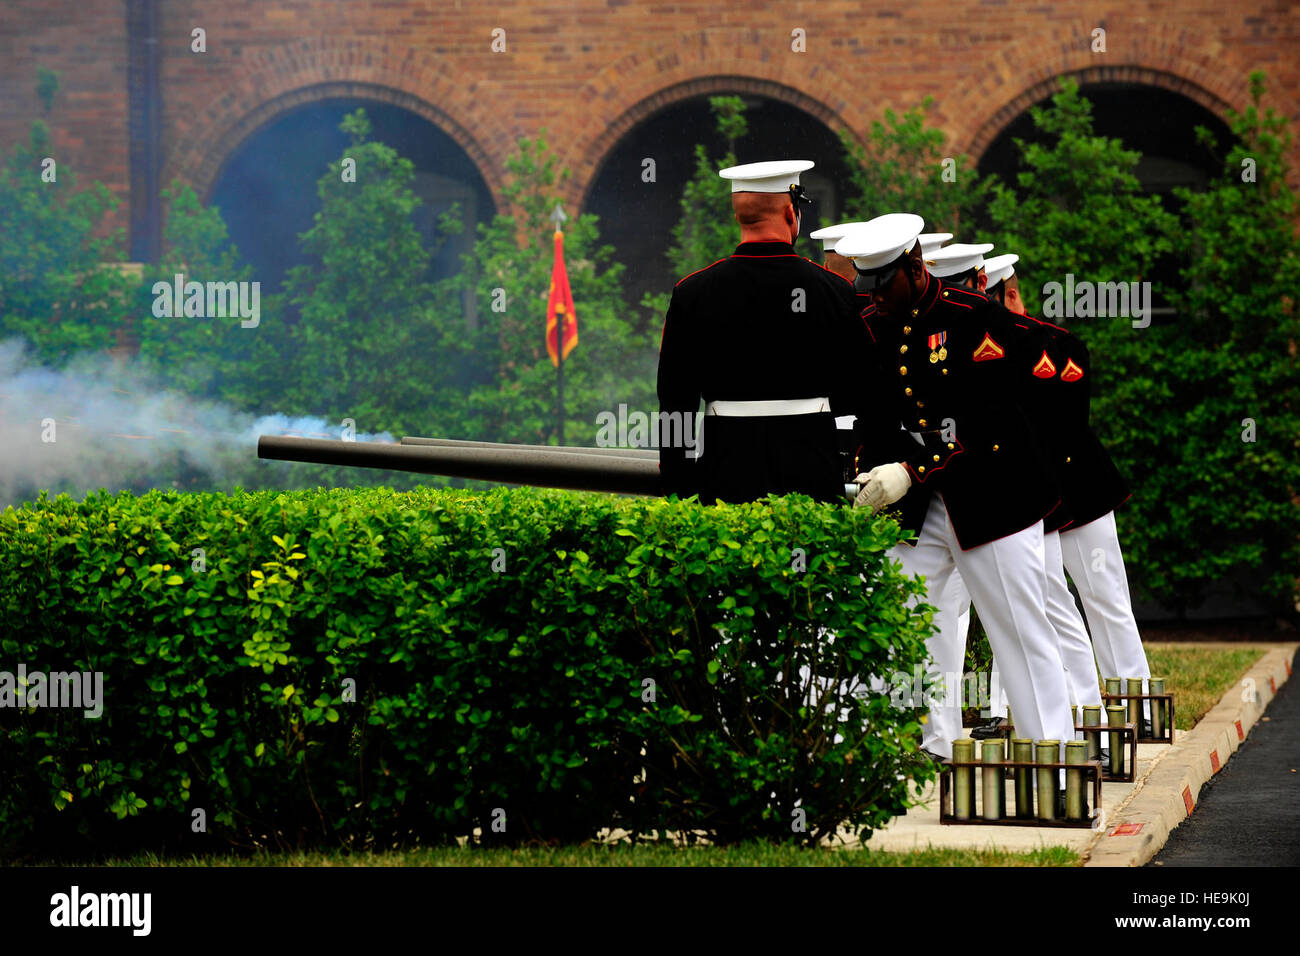 Marines from the Body Bearers Section, Bravo Company, fire a saluting battery at the farewell tribute for Joint Chiefs of Staff Vice Chairman Gen. James E. Cartwright at the Marine Corps Barracks, Washington, D.C., Aug. 3, 2011.  Tech. Sgt. Jacob N. Bailey, U.S. Air Force Stock Photo